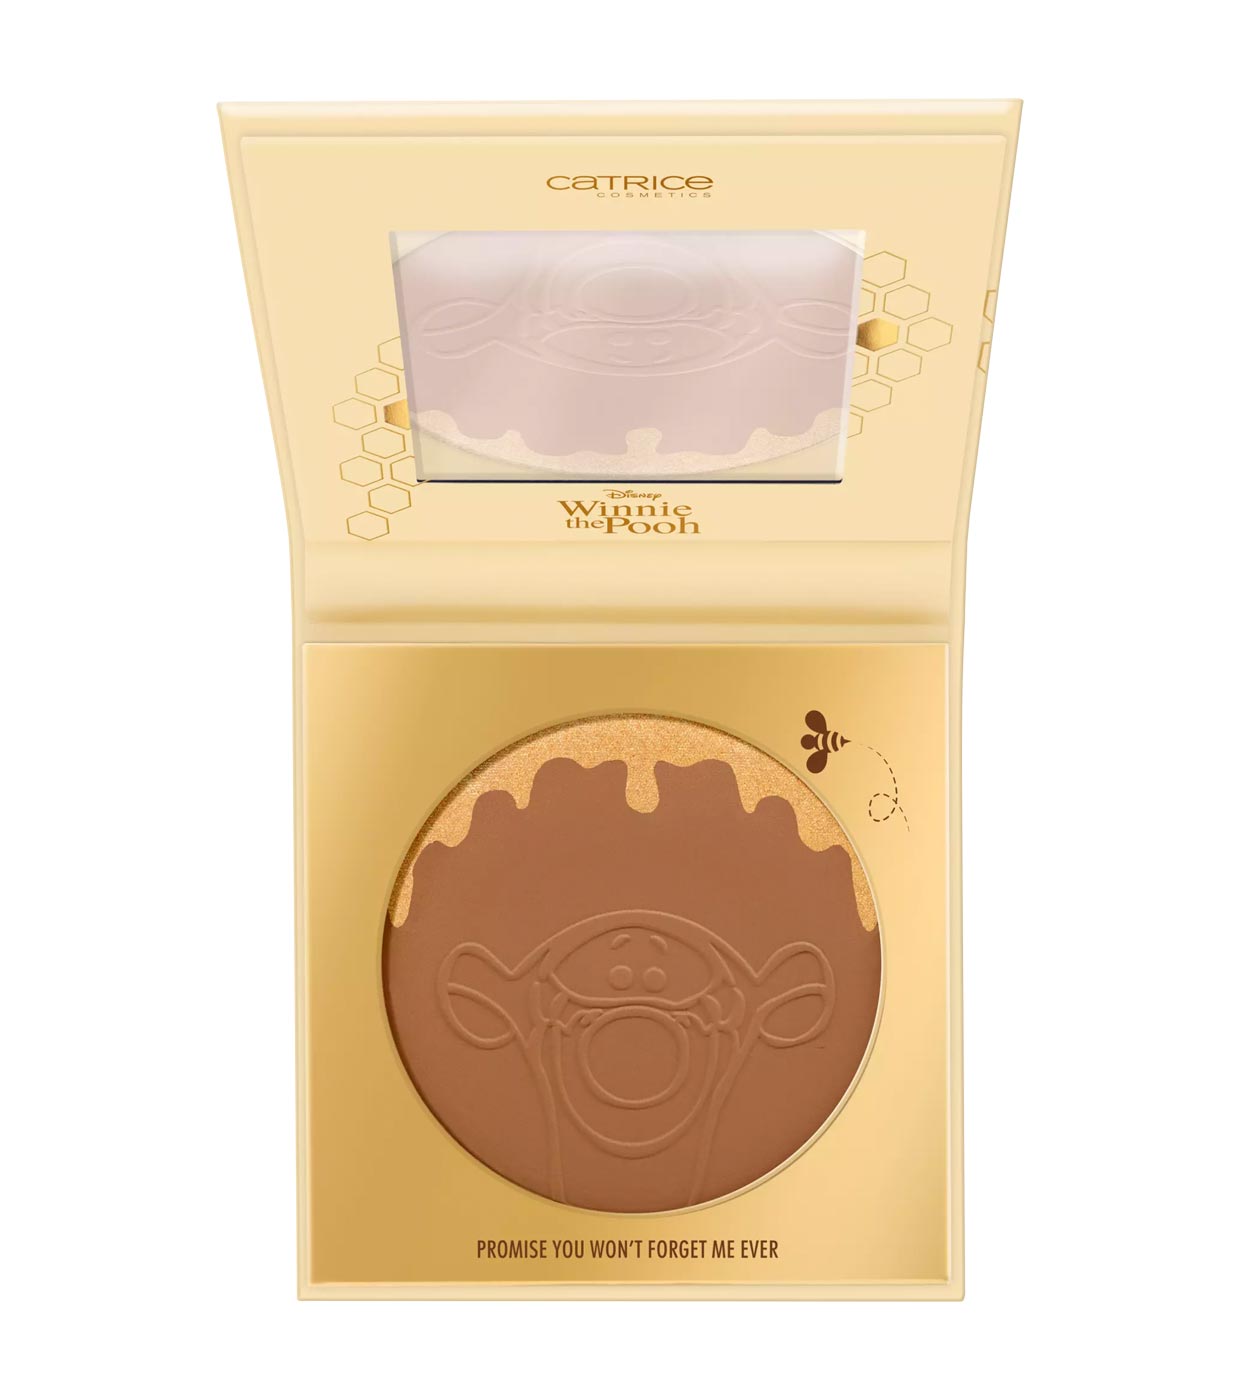 Buy Catrice - *Winnie the | Subtle Pooh* Ever - Shimmer Promise Maquillalia Powder Bronzer Forget Me You 020: Won\'t 